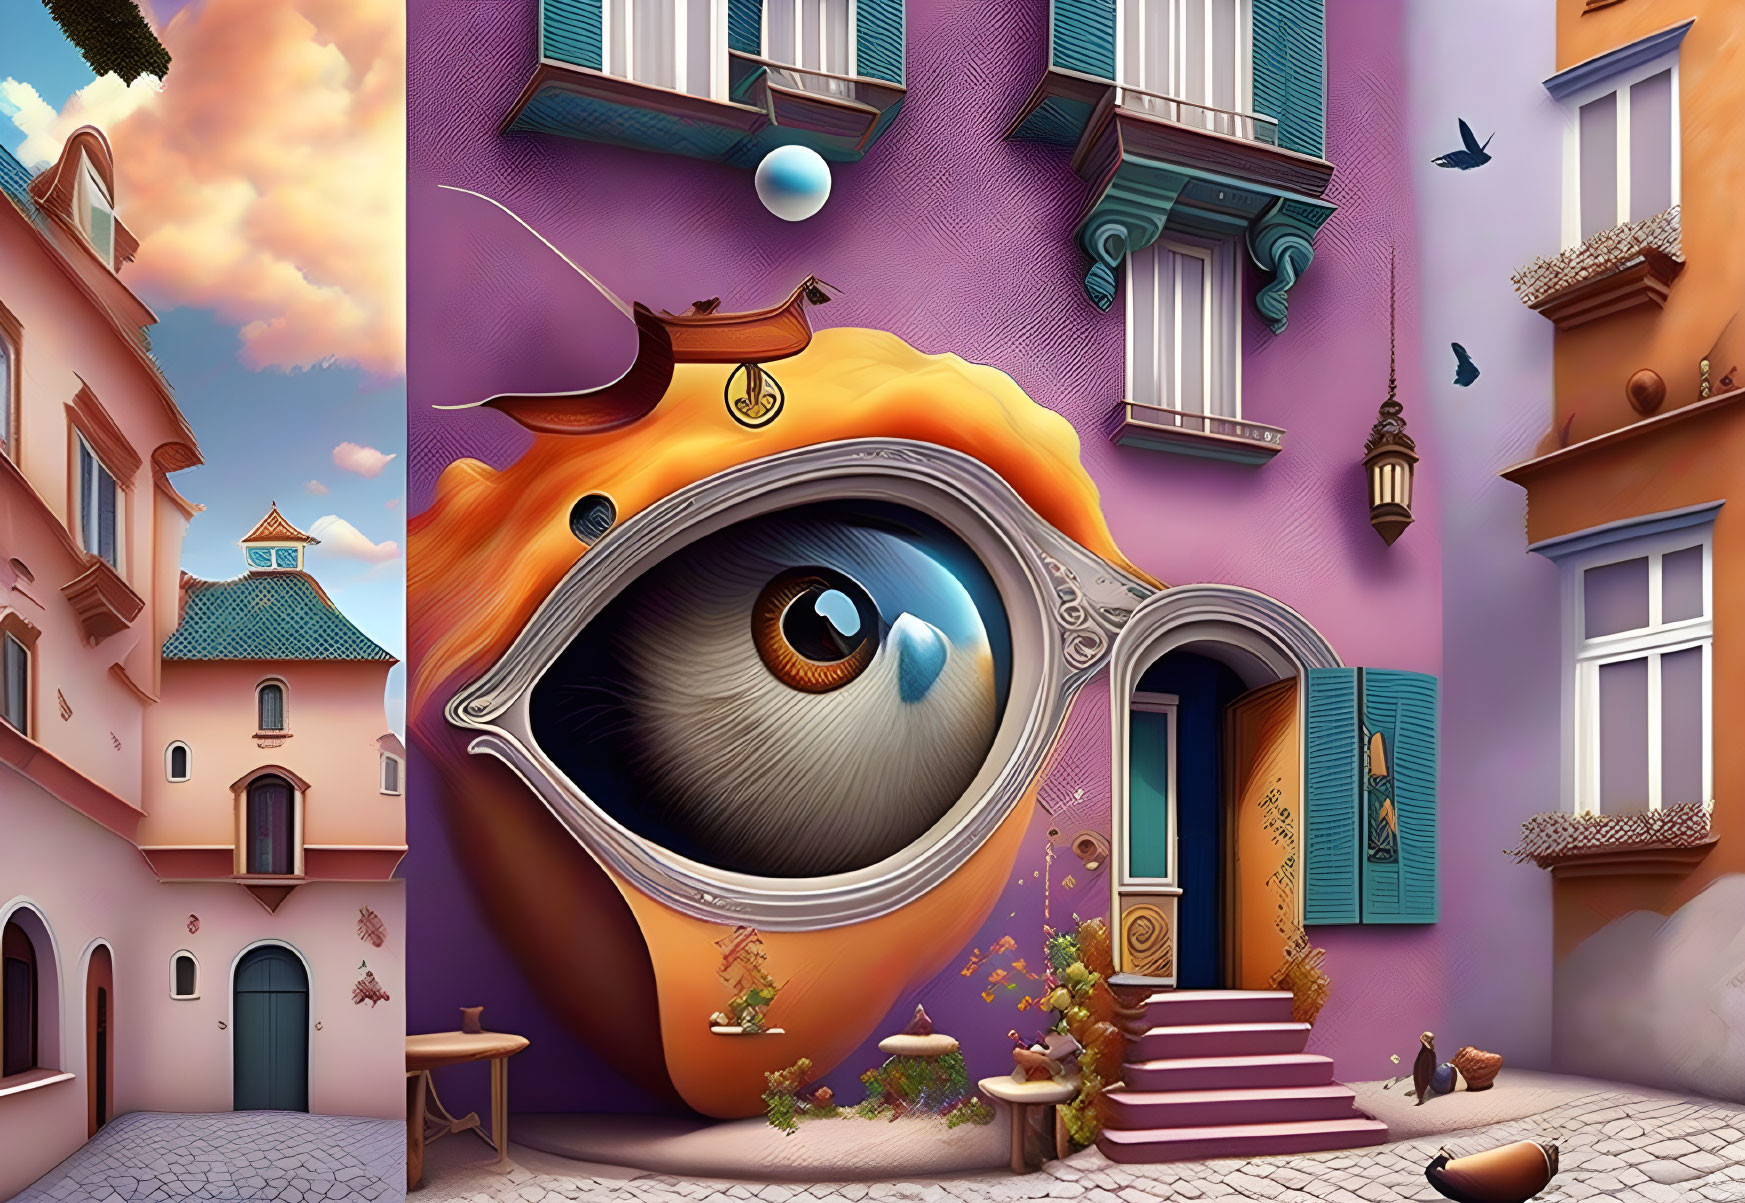 Whimsical building facade with giant eye in eyeglass frames